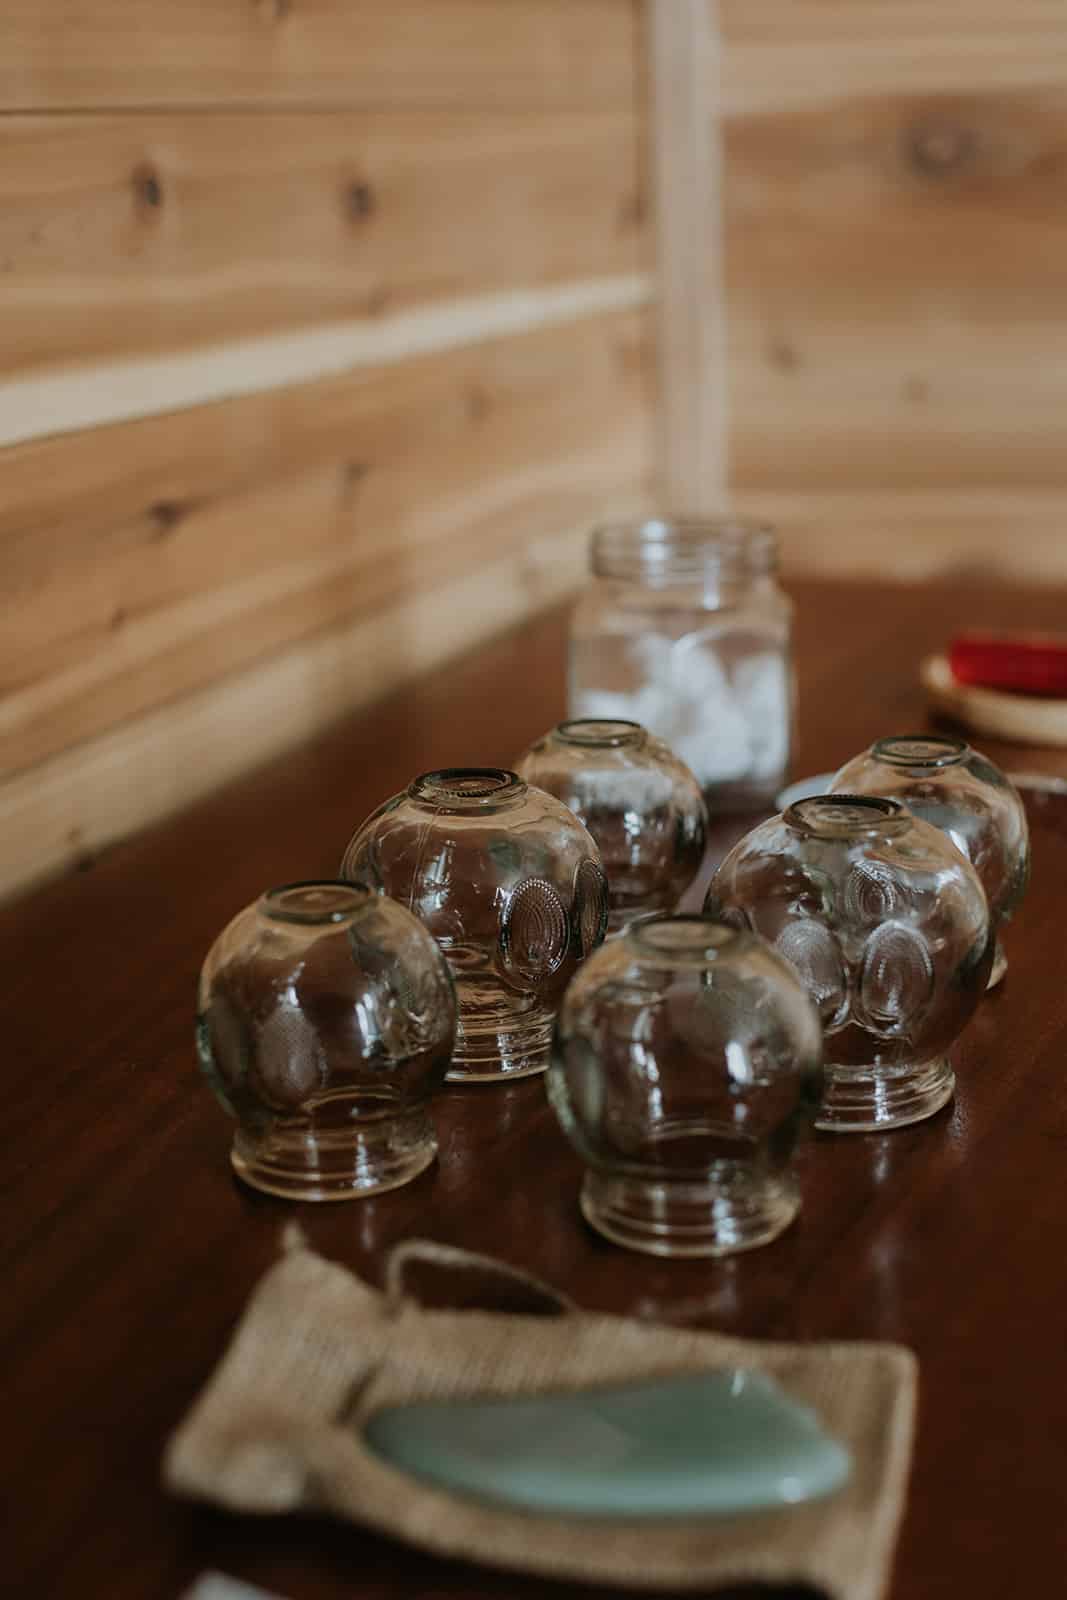 Traditional cupping therapy cups arranged for an acupuncture session